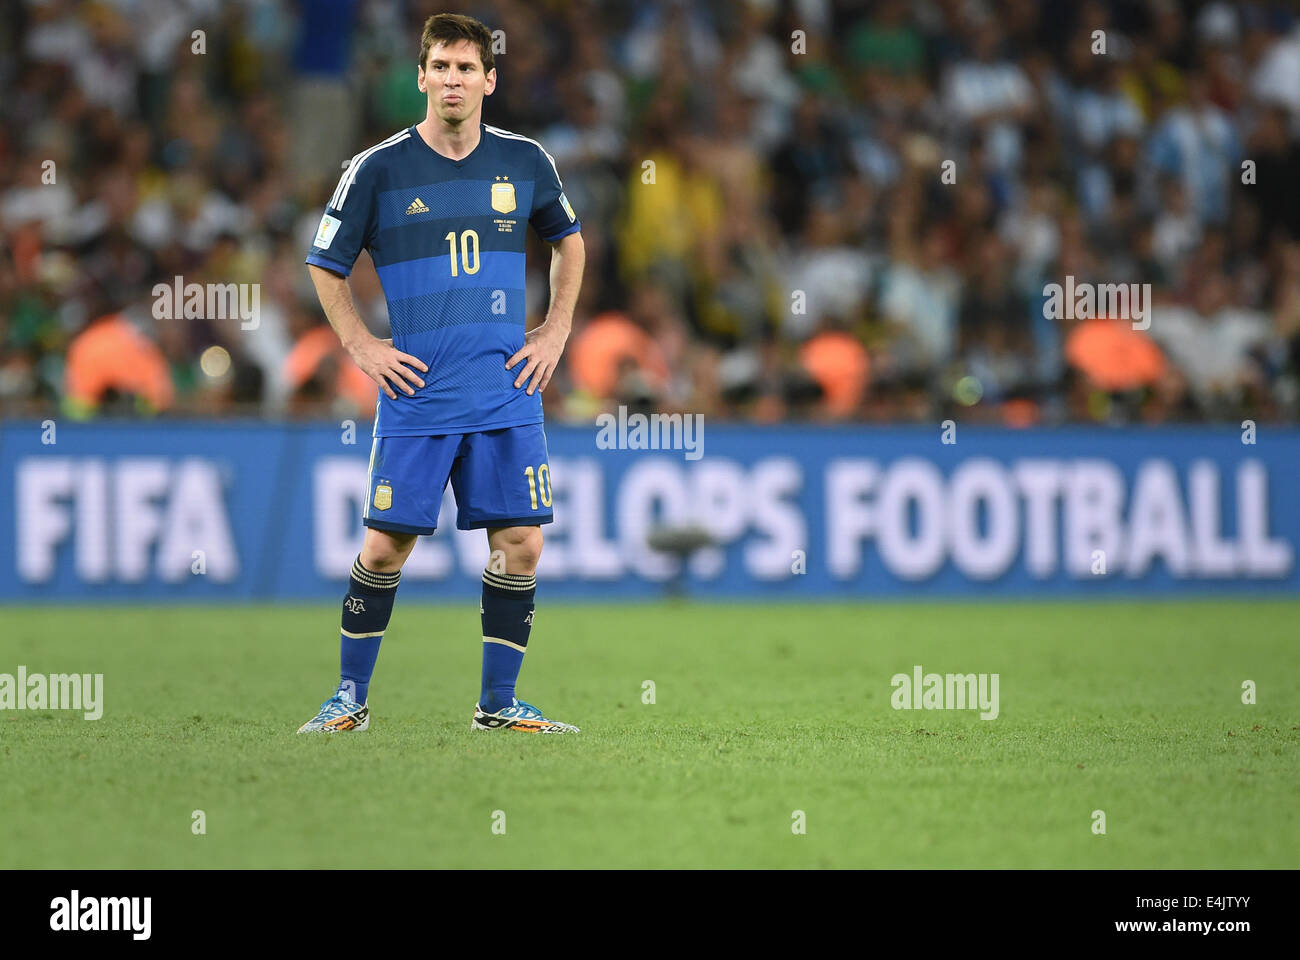 Rio de Janeiro, Brazil. 13th July, 2014. Dejected Lionel Messi of Argentina looks on after the FIFA World Cup 2014 final soccer match between Germany and Argentina at the Estadio do Maracana in Rio de Janeiro, Brazil, 13 July 2014. Photo: Andreas Gebert/dpa/Alamy Live News Stock Photo